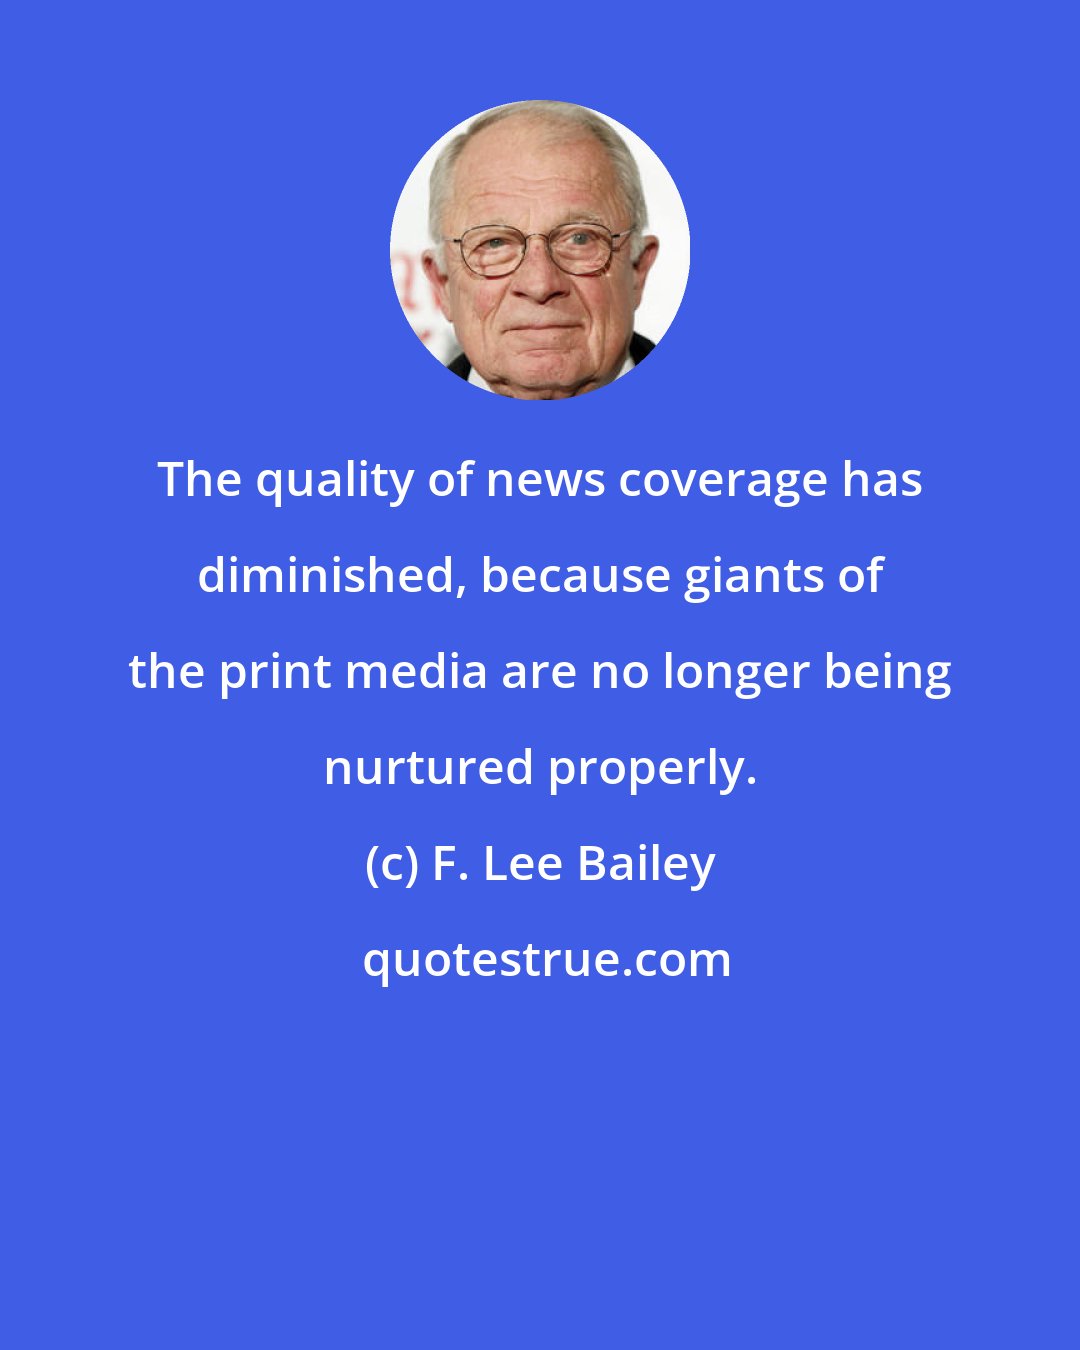 F. Lee Bailey: The quality of news coverage has diminished, because giants of the print media are no longer being nurtured properly.